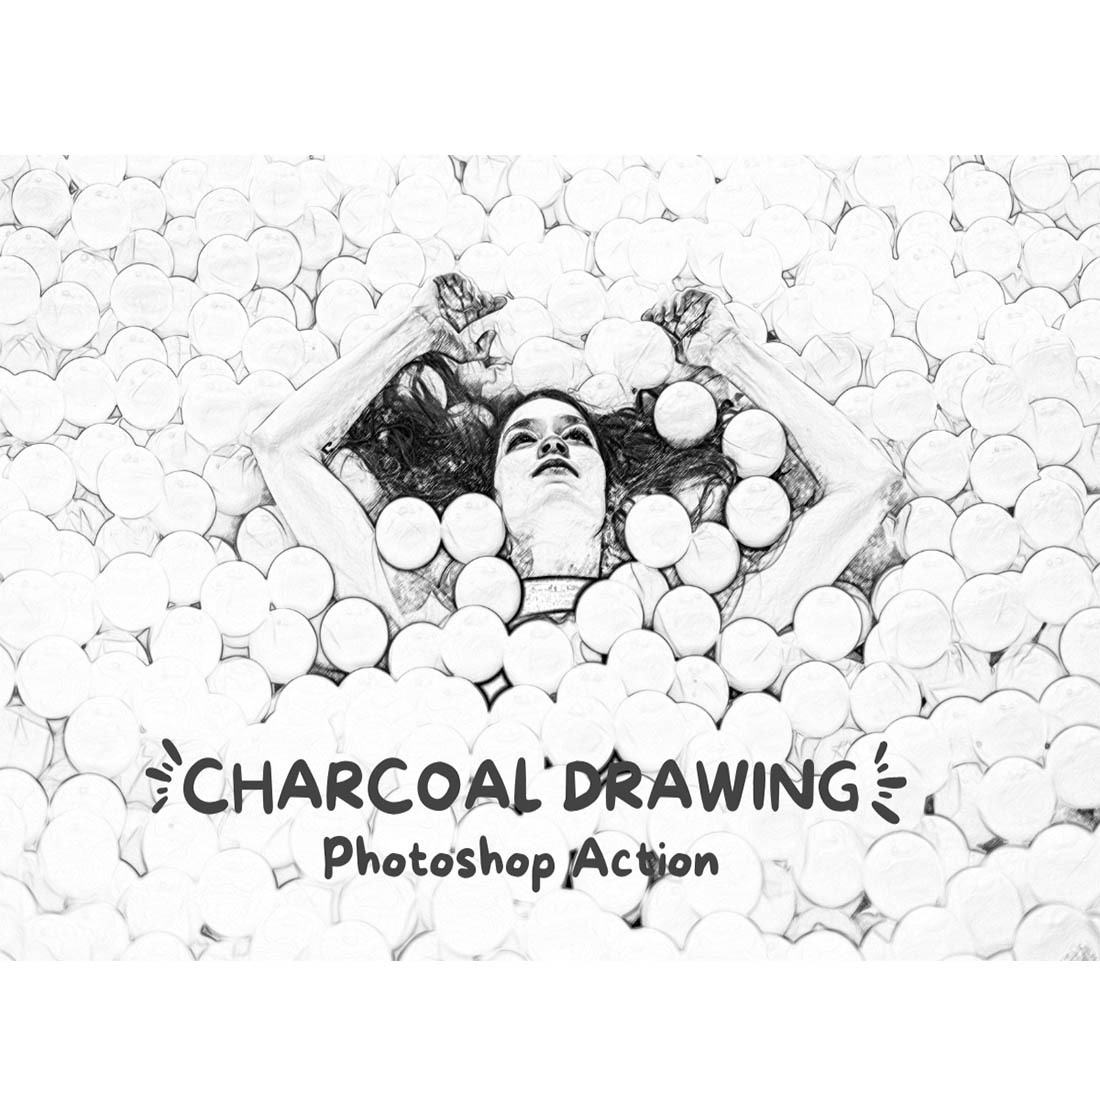 Charcoal Drawing Photoshop Actions cover